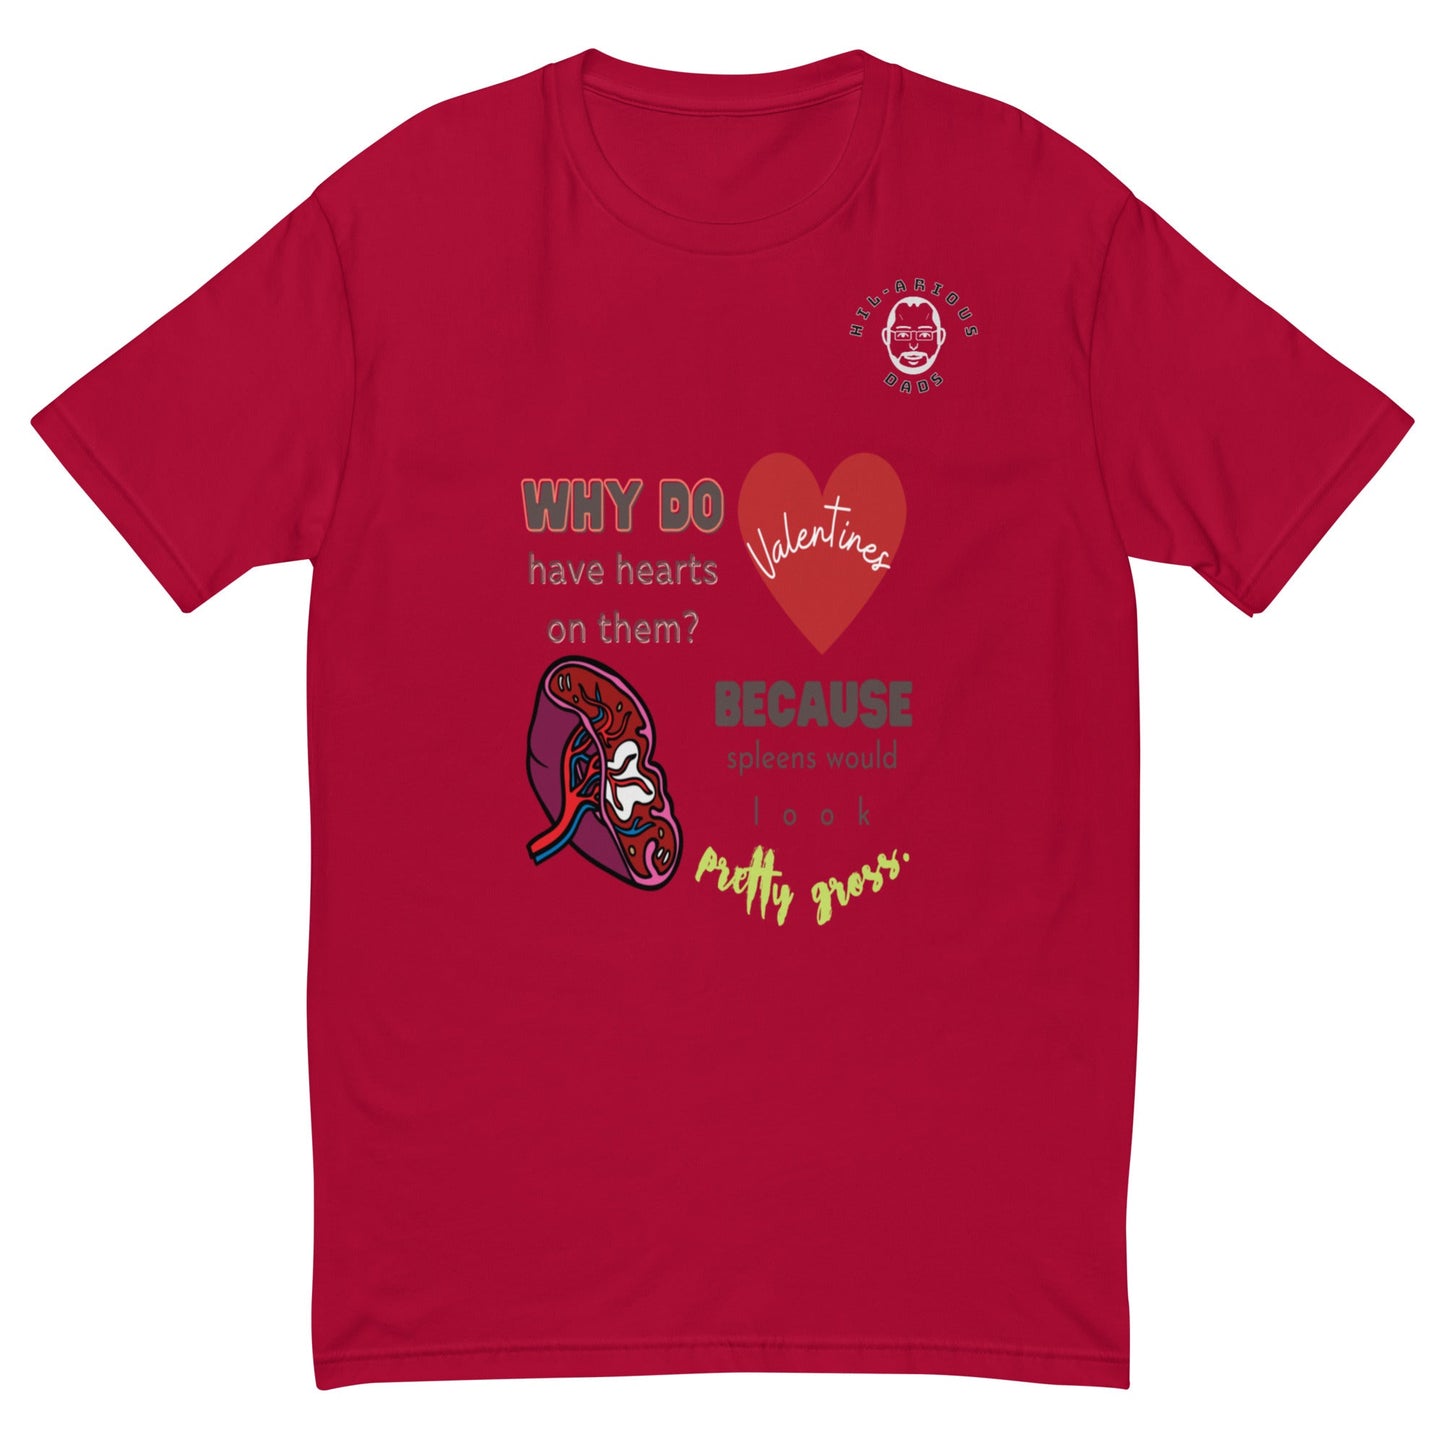 Why do Valentine's have hearts on them?-T-shirt - Hil-arious Dads